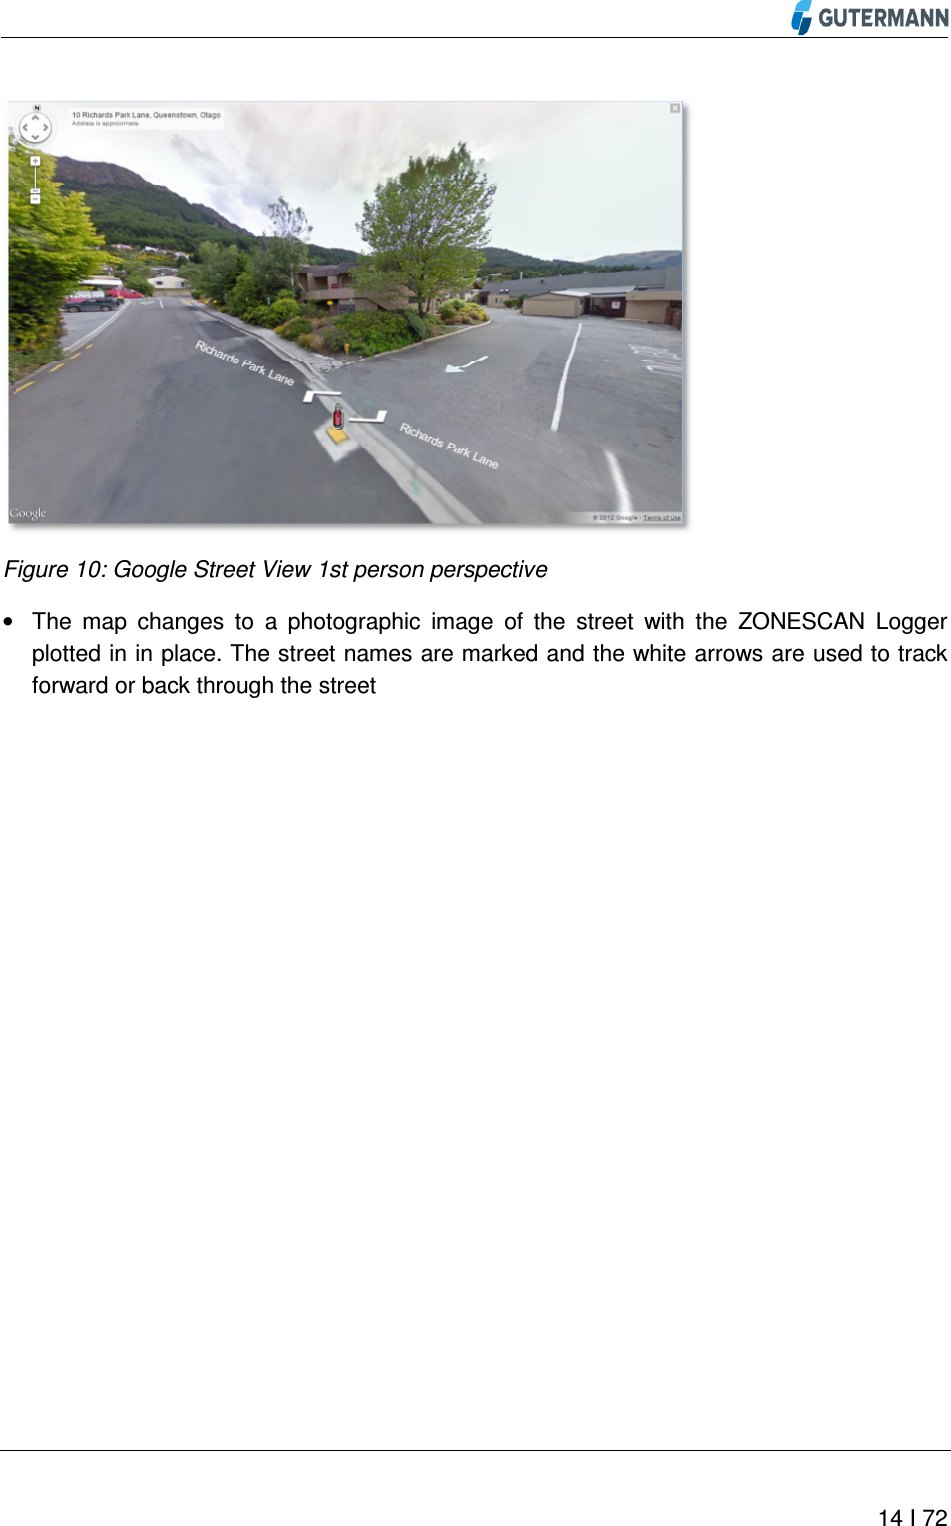          14 I 72   Figure 10: Google Street View 1st person perspective •  The  map  changes  to  a  photographic  image  of  the  street  with  the  ZONESCAN  Logger plotted in in place. The street names are marked and the white arrows are used to track forward or back through the street    